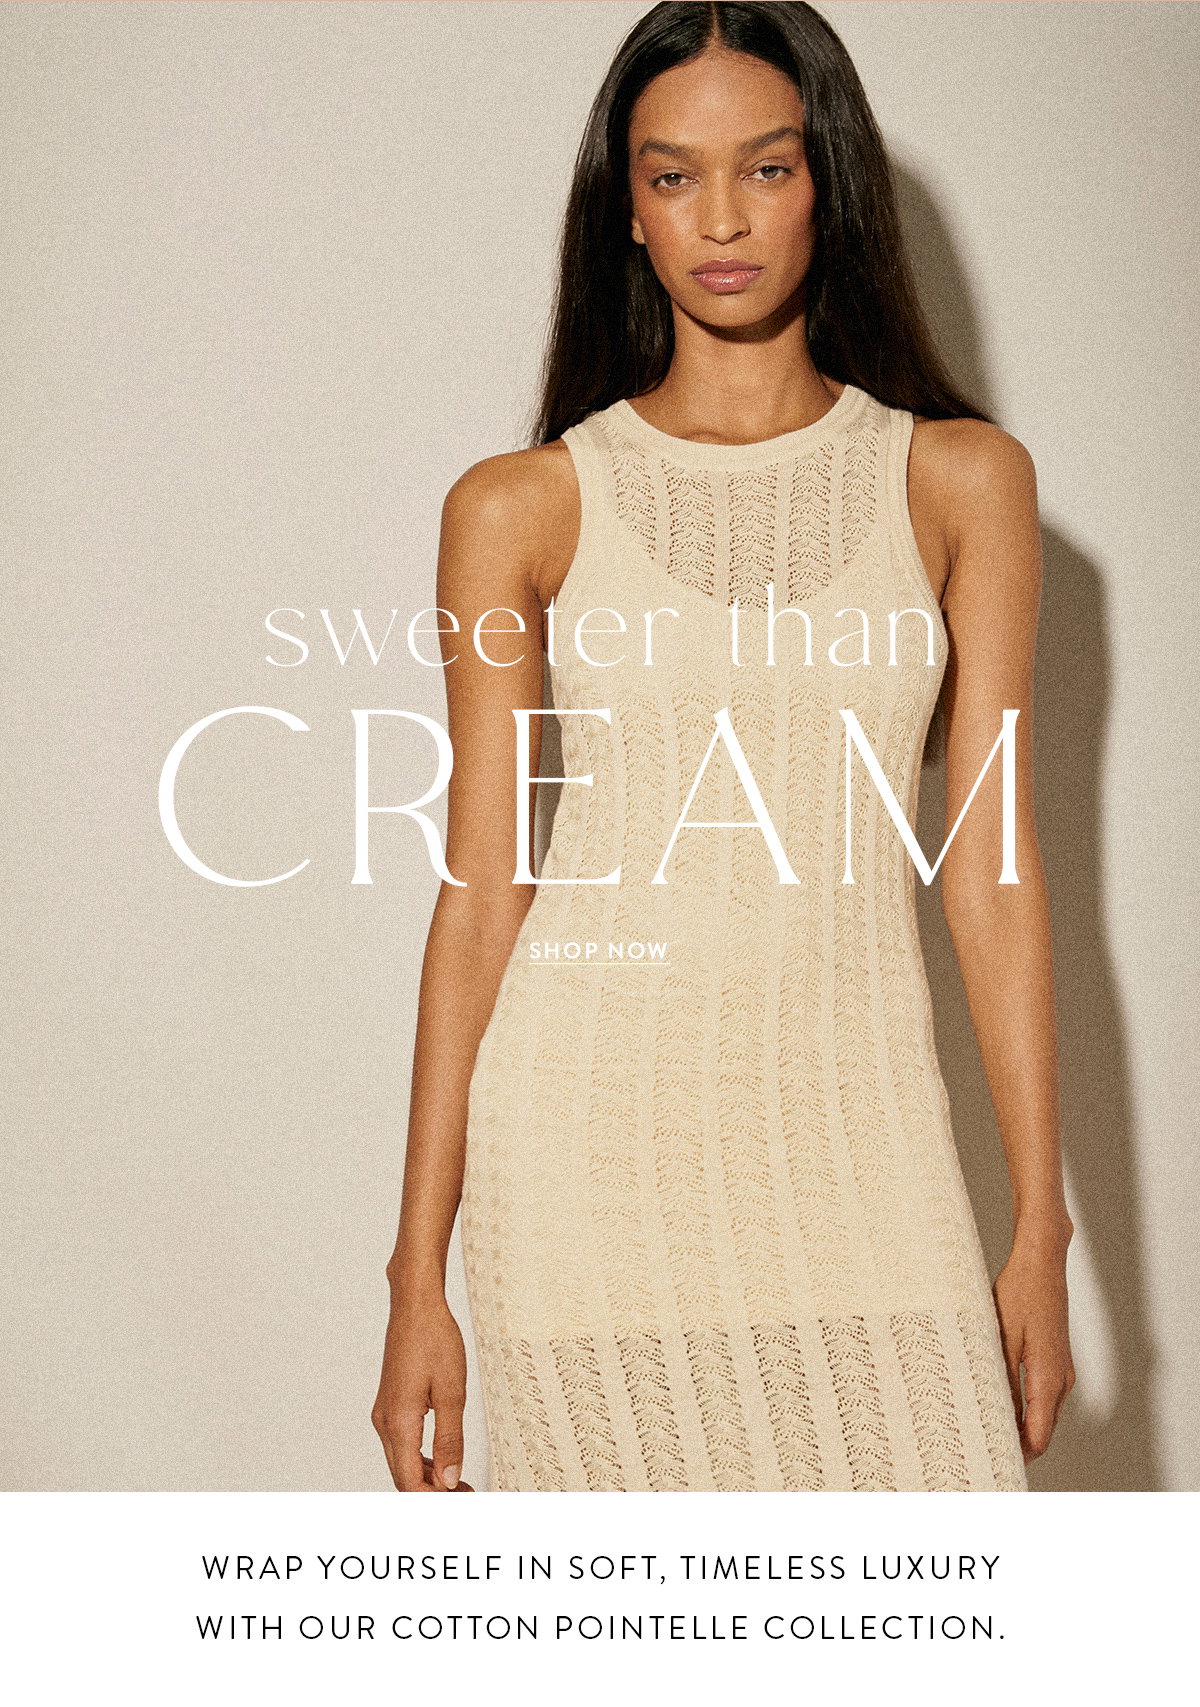 SWEETER THAN CREAM SHOP NOW Wrap yourself in soft, timeless luxury with our cotton pointelle collection.